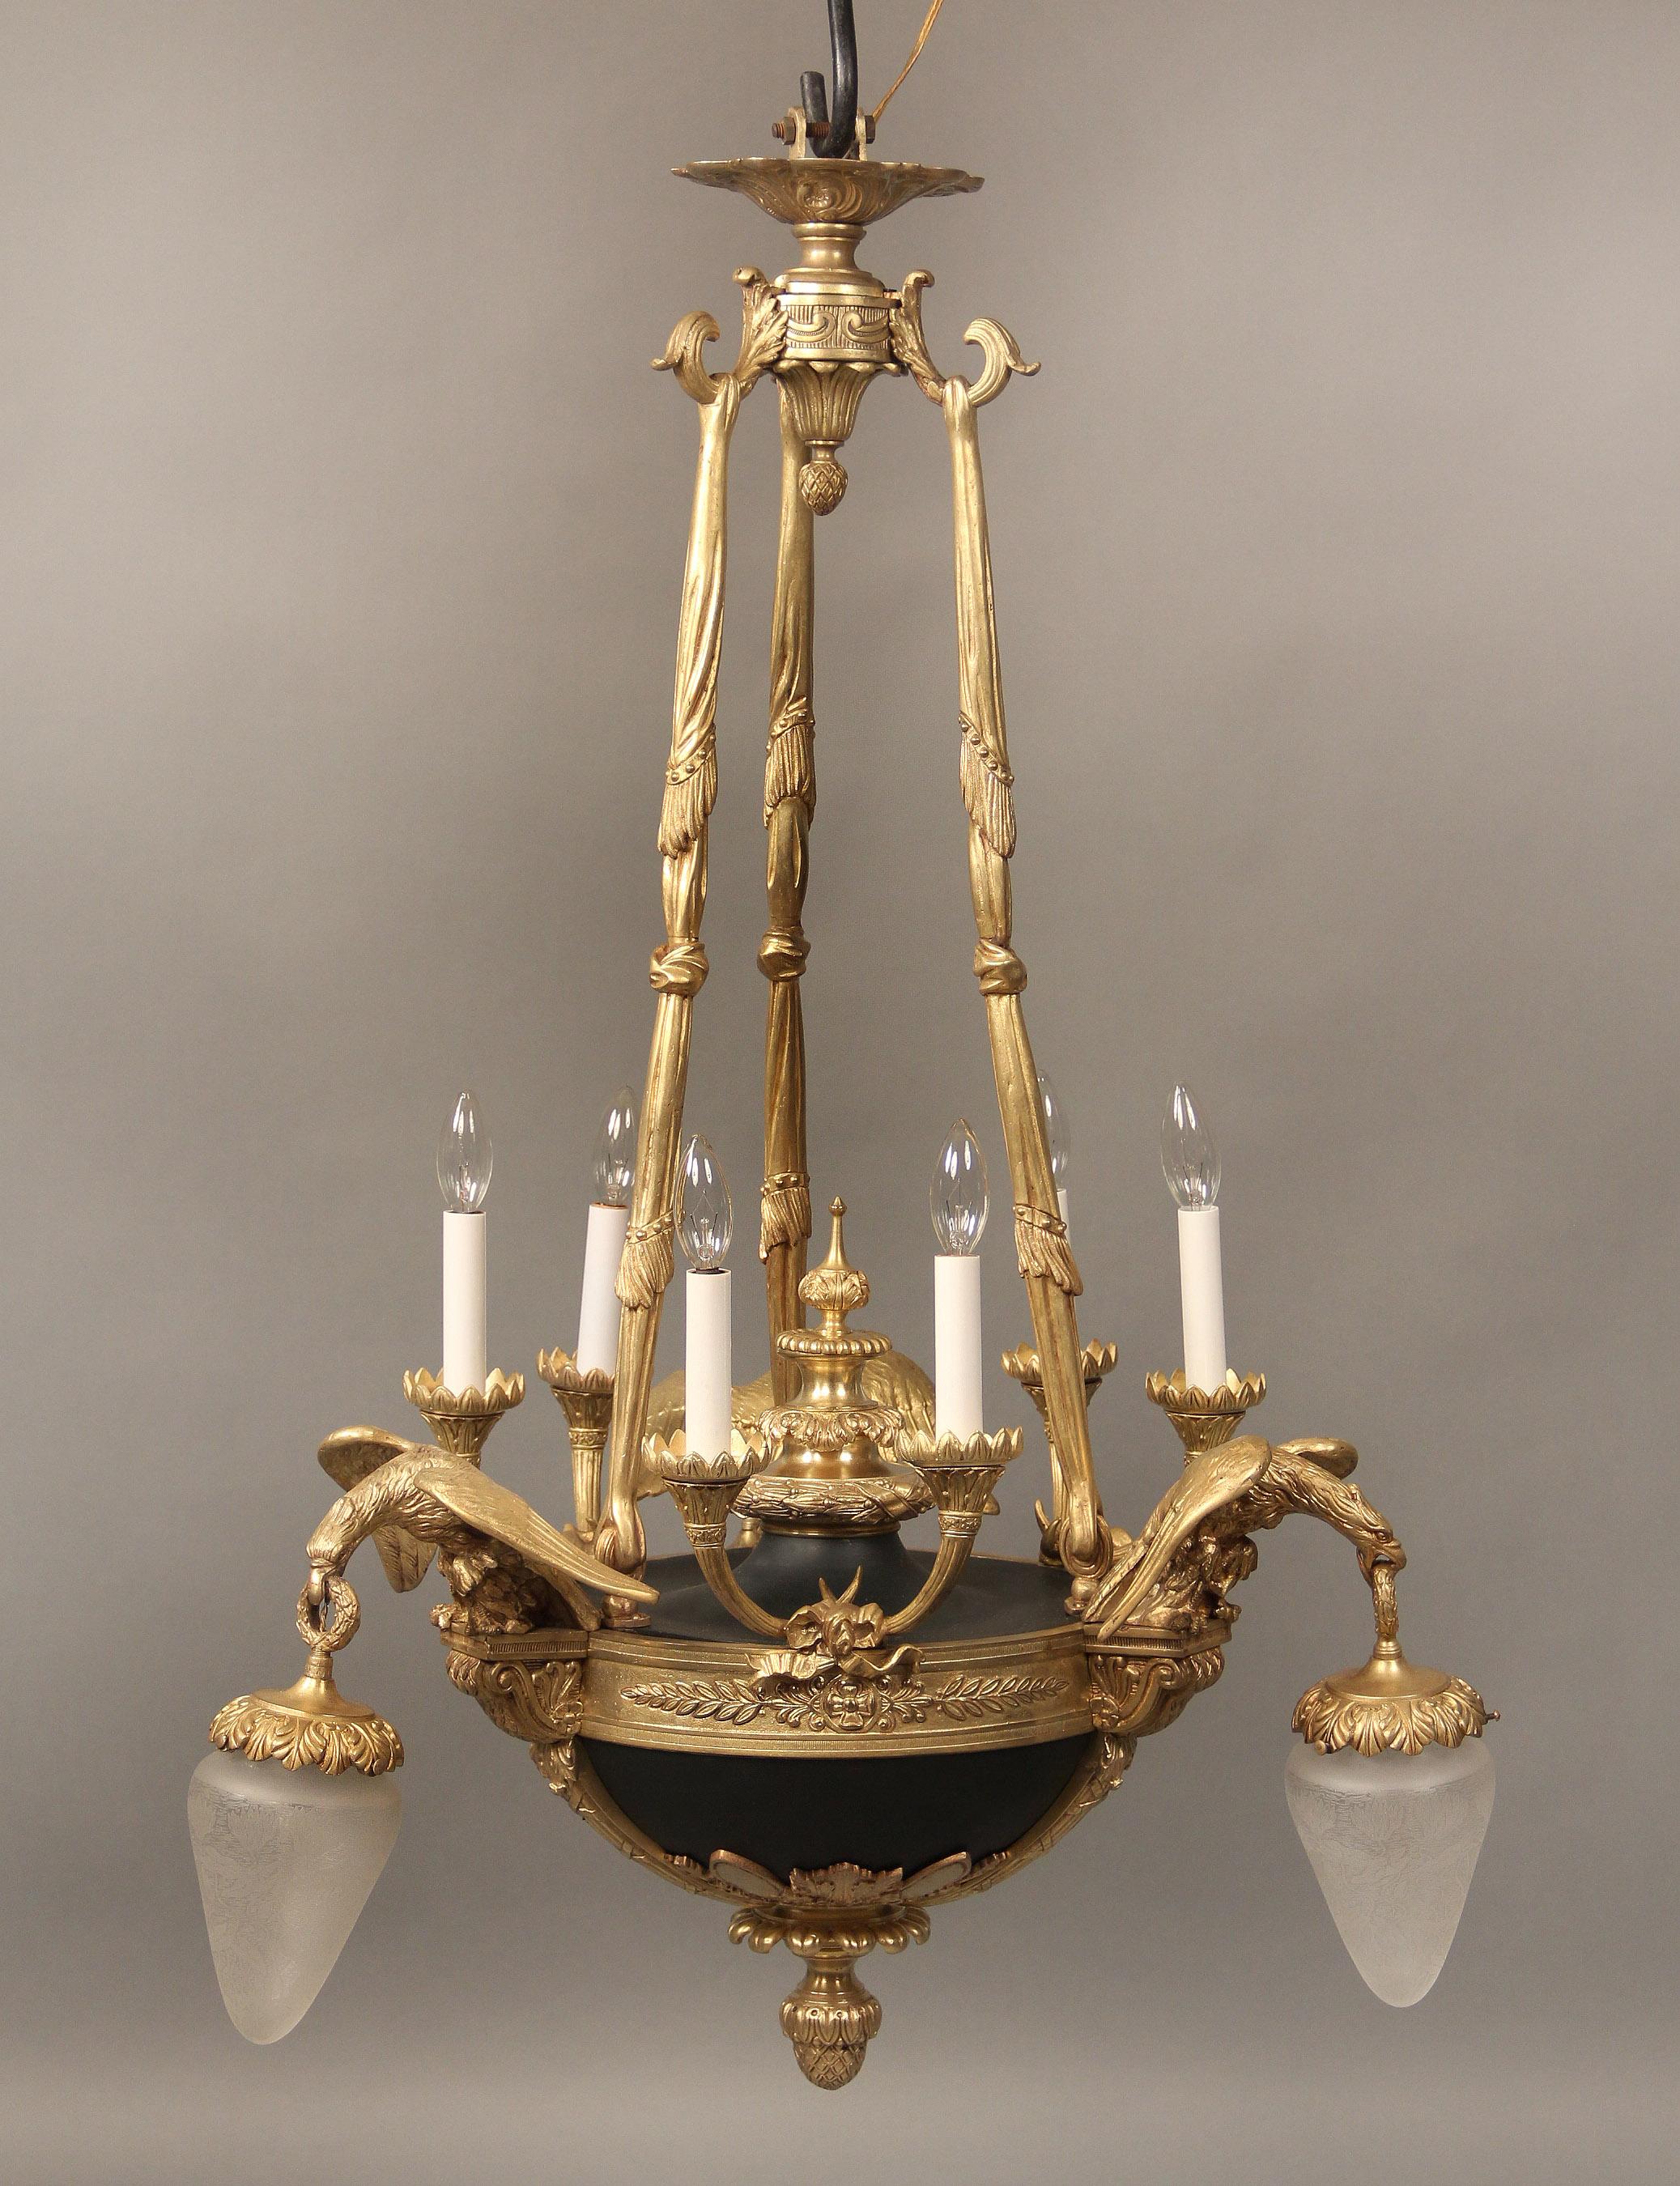 An Interesting early 20th century gilt and patinated bronze nine-light Empire style chandelier.

Three curtain designed ropes run from the top to the body, centred by a large urn, six torch arms with lights and three eagles with spread wings and